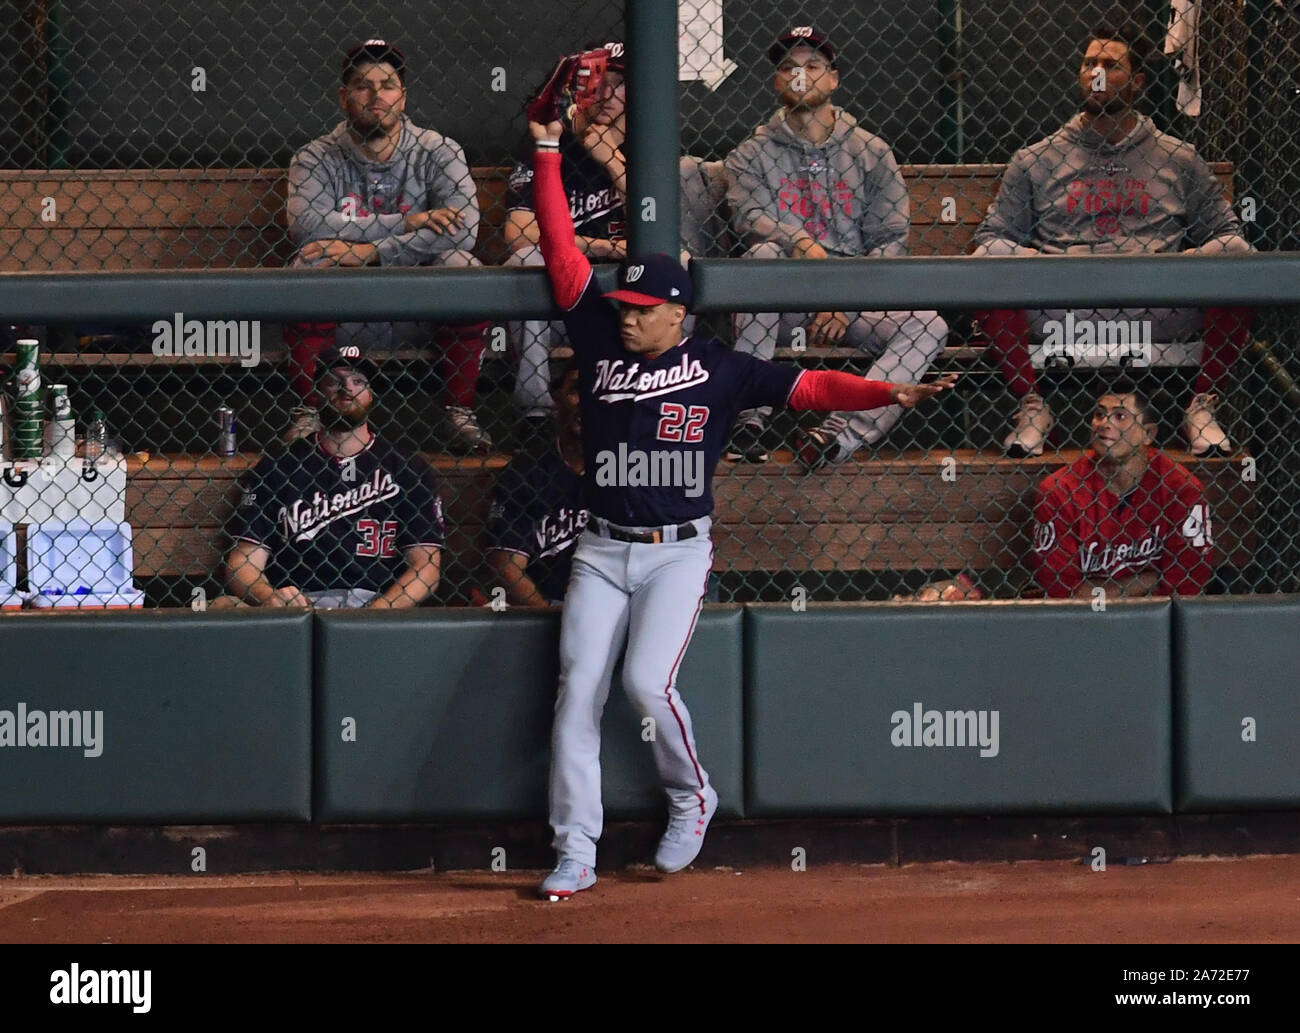 Houston, United States. 29th Oct, 2019. Washington Nationals left fielder Juan Soto grabs Houston Astros Jordan Alvarez's fly ball to the wall to end the first inning in Game 6 of the 2019 World Series at Minute Maid Park in Houston on Tuesday, October 29, 2019. The Astros lead the series 3-2 over the Nationals. Photo by Kevin Dietsch/UPI Credit: UPI/Alamy Live News Stock Photo